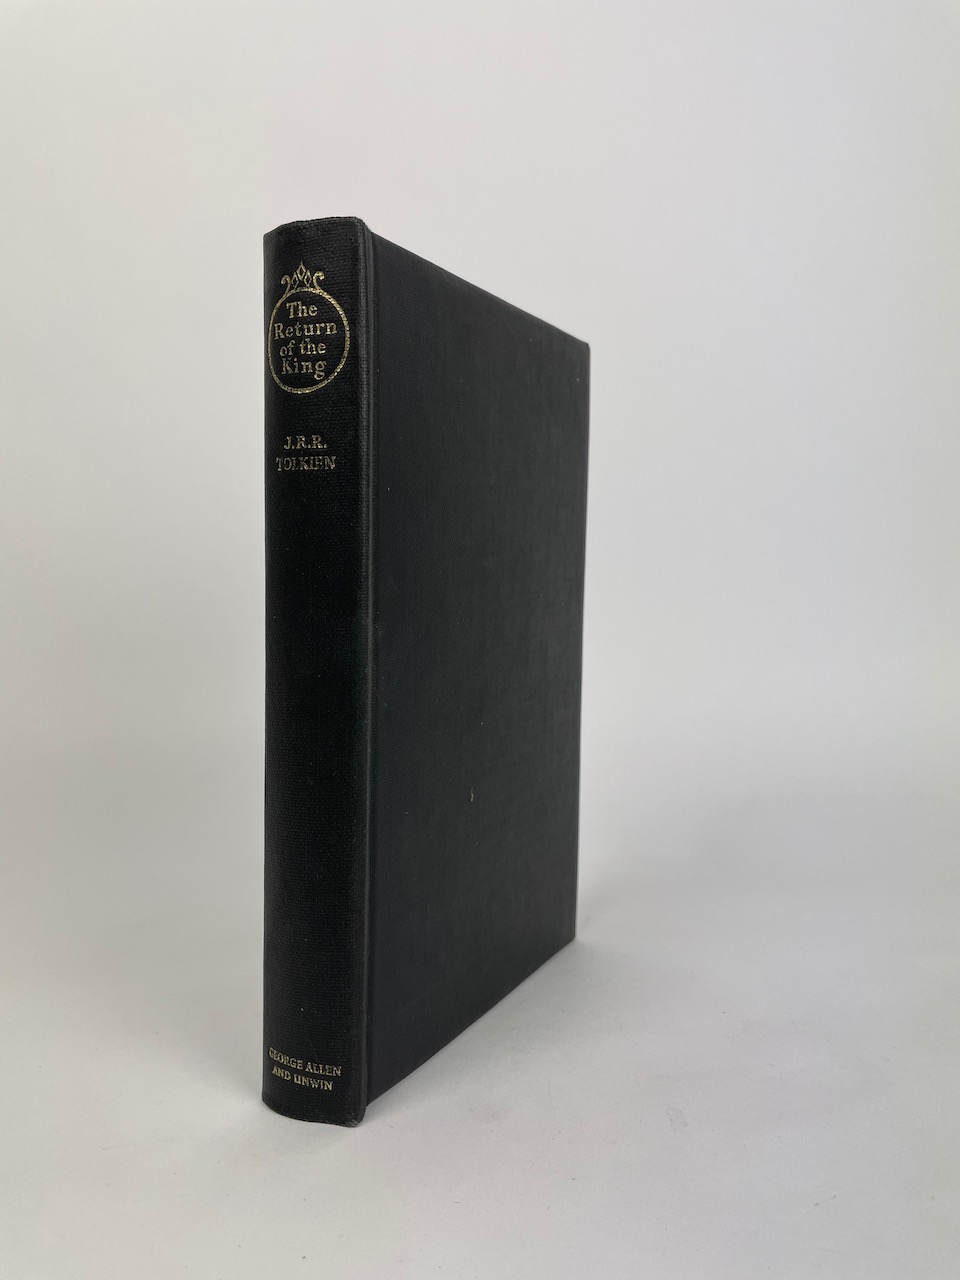 
1963 1st UK Lord of the Rings Deluxe Edition 24